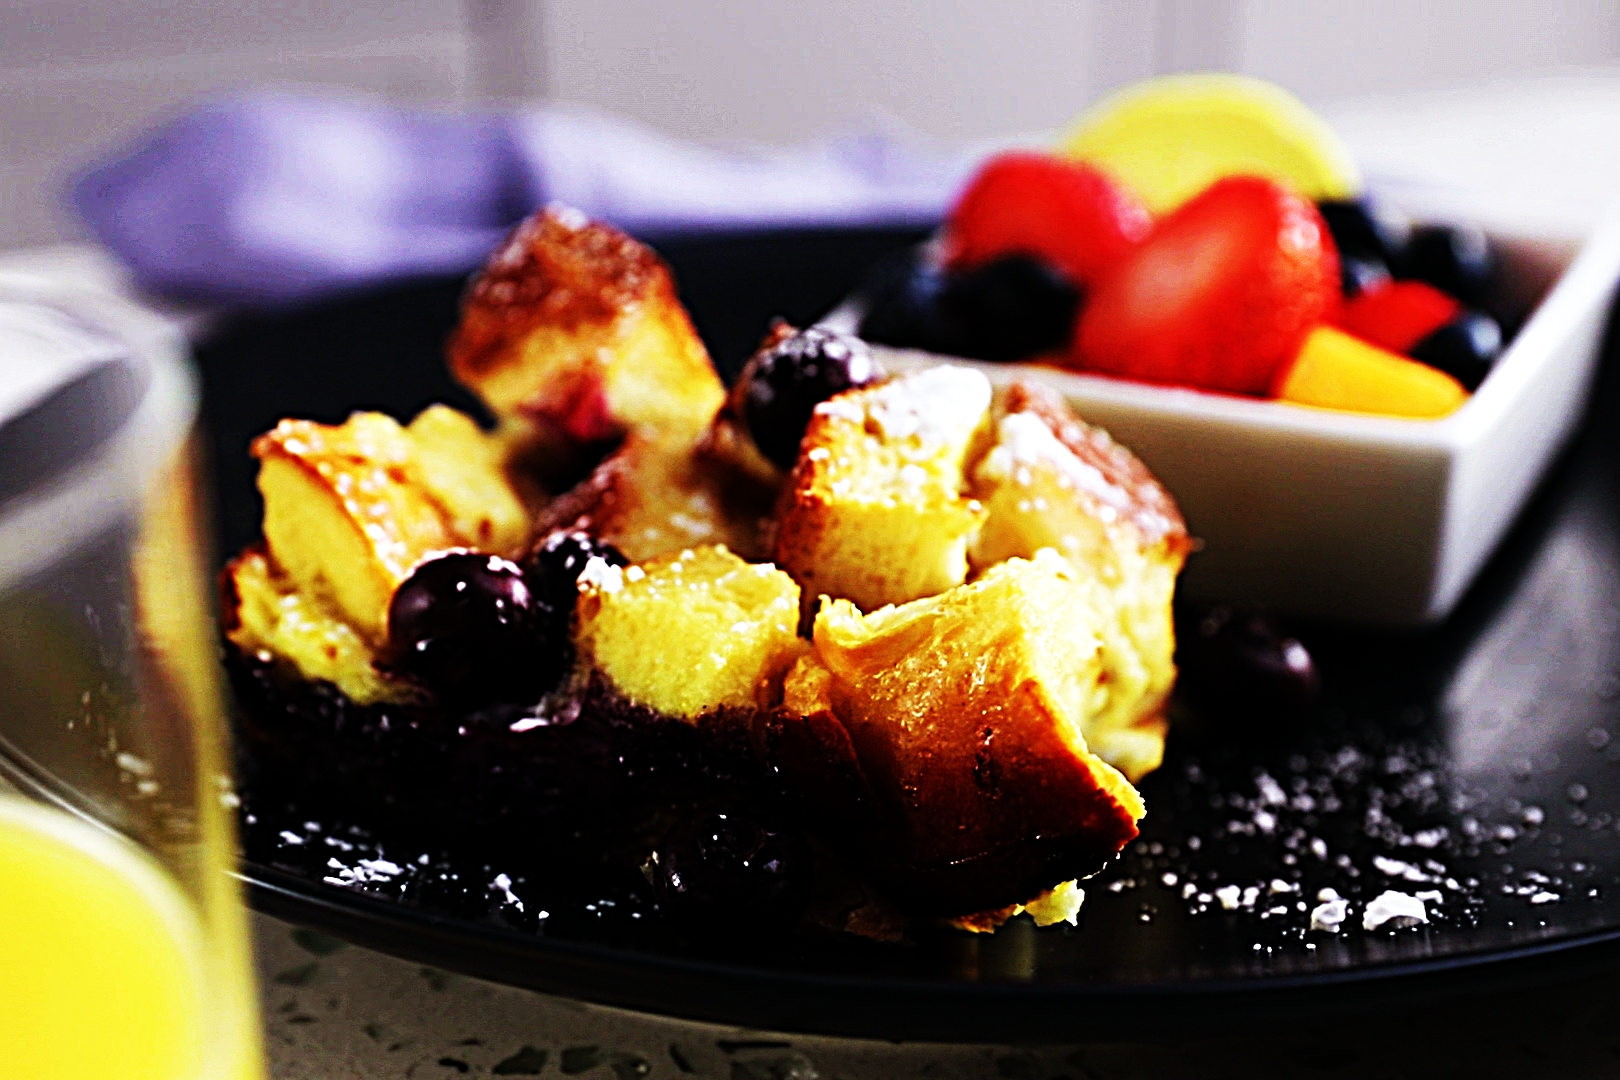 Stupid-Easy Recipe for Lemon Blueberry Baked French Toast Casserole (#1 Top-Rated)